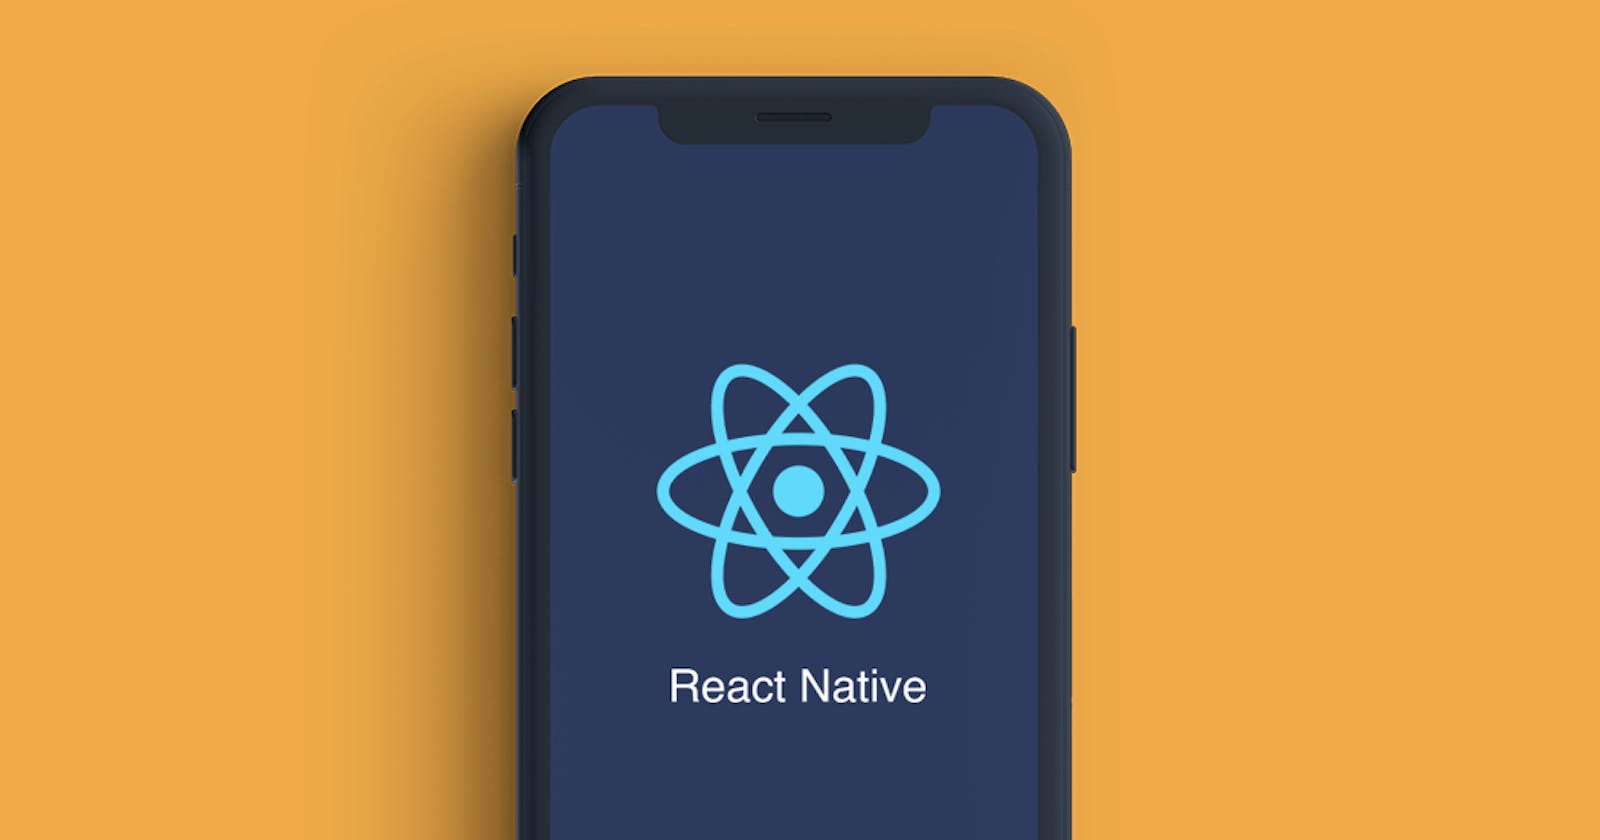 React-Native: Issue Fix - "network response time-out" error when attempting to connect to expo app on mobile device